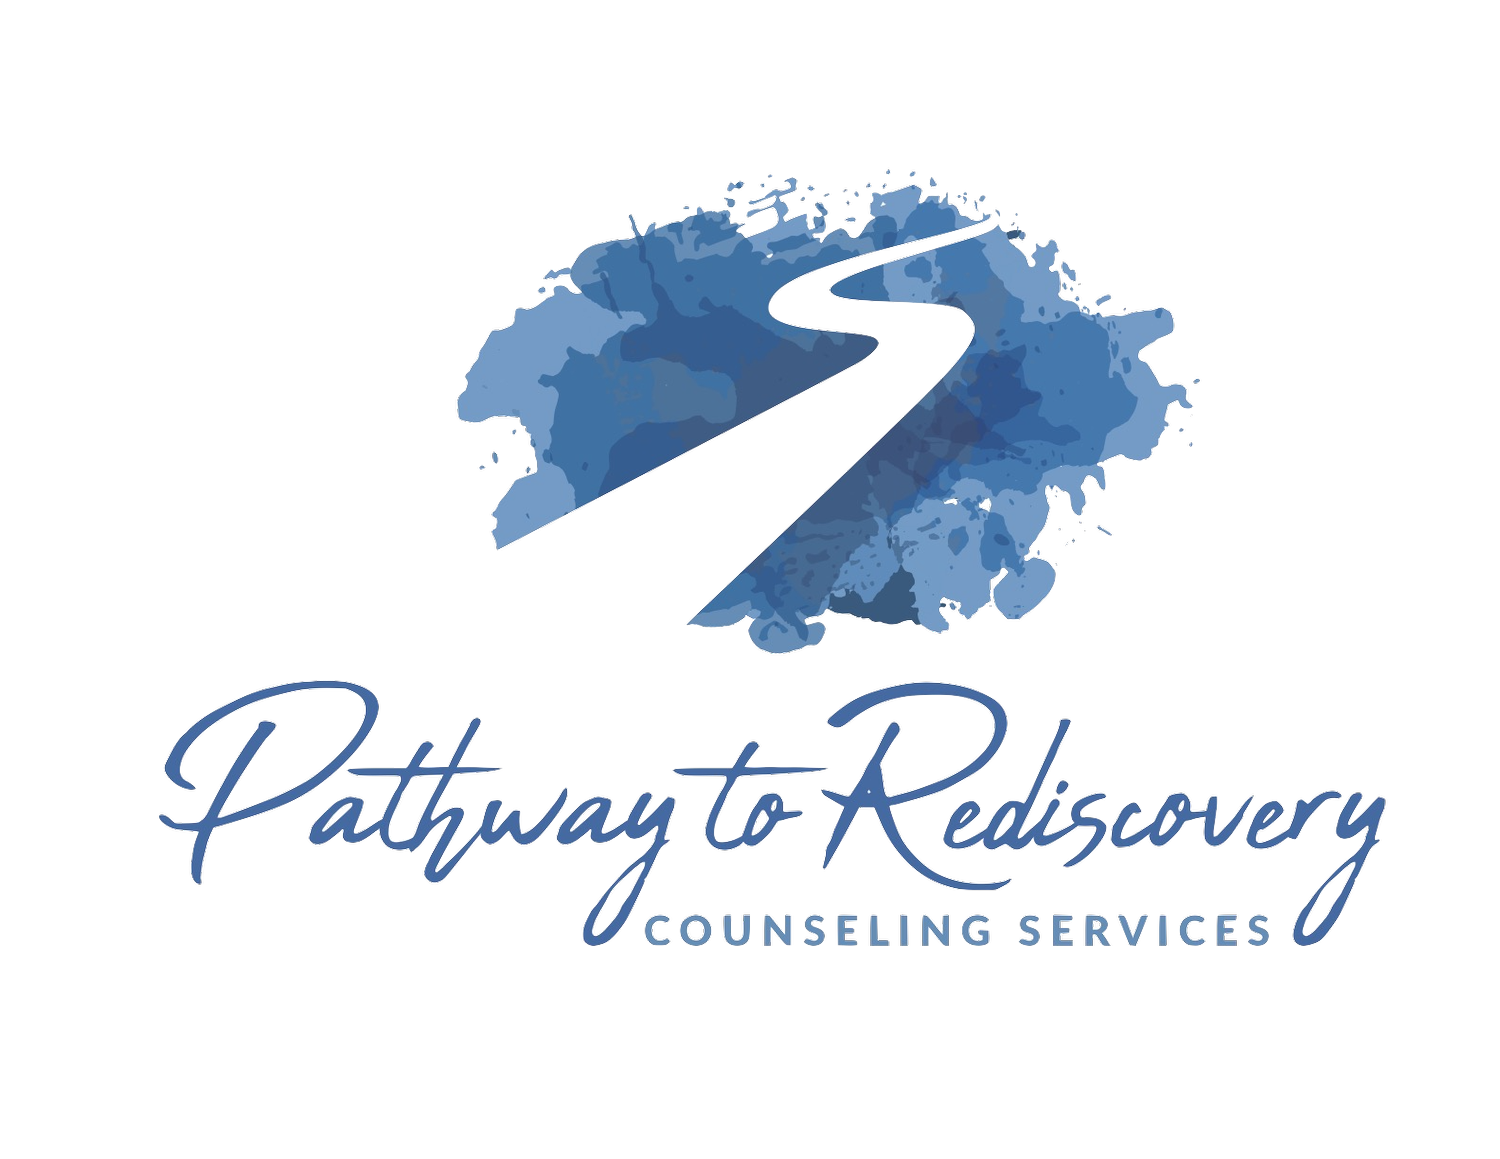 Pathway to Rediscovery Counseling Services